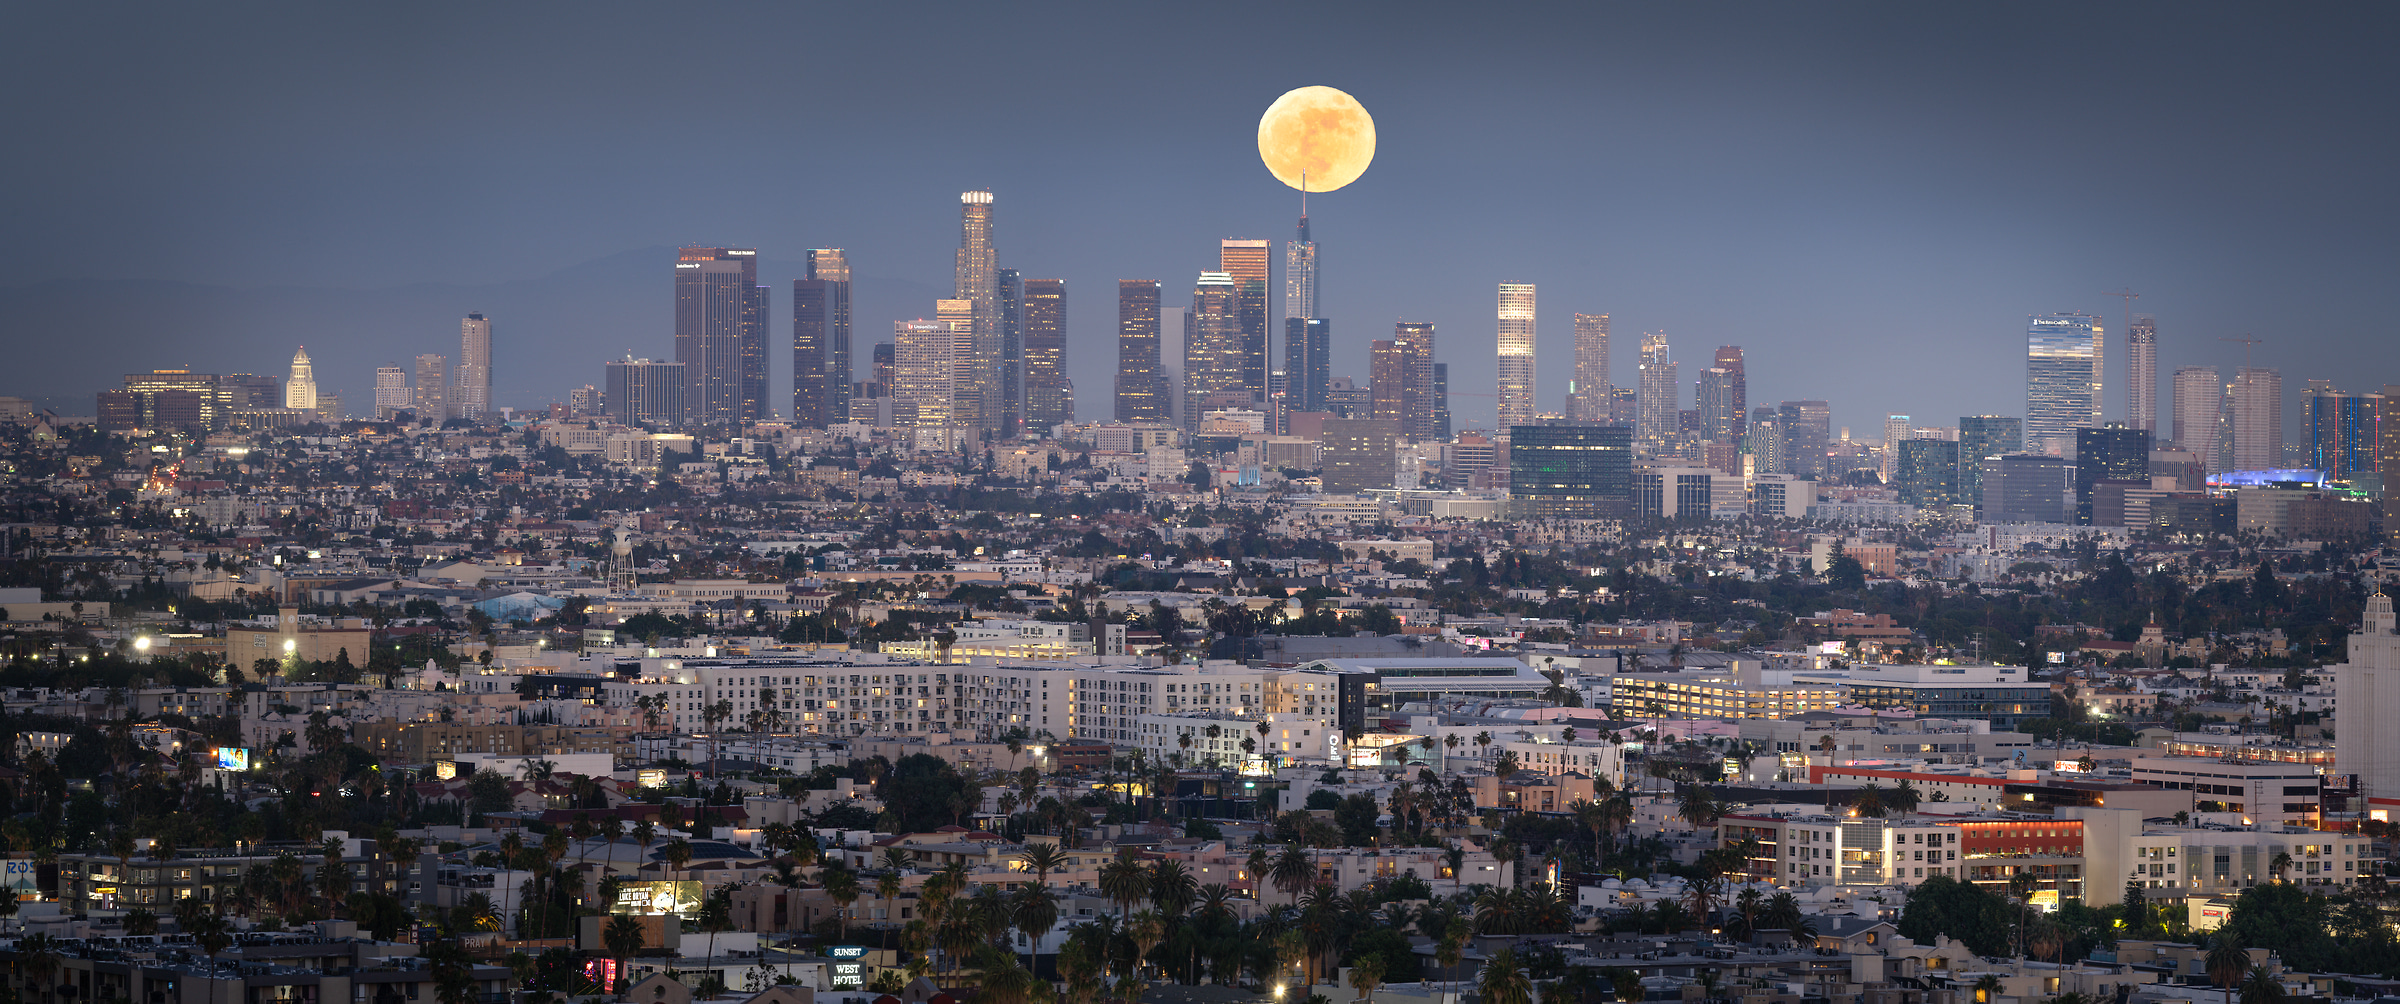 259 megapixels! A very high resolution, large-format VAST photo print of the Los Angeles skyline; cityscape photograph created by Jeff Lewis in Los Angeles, California